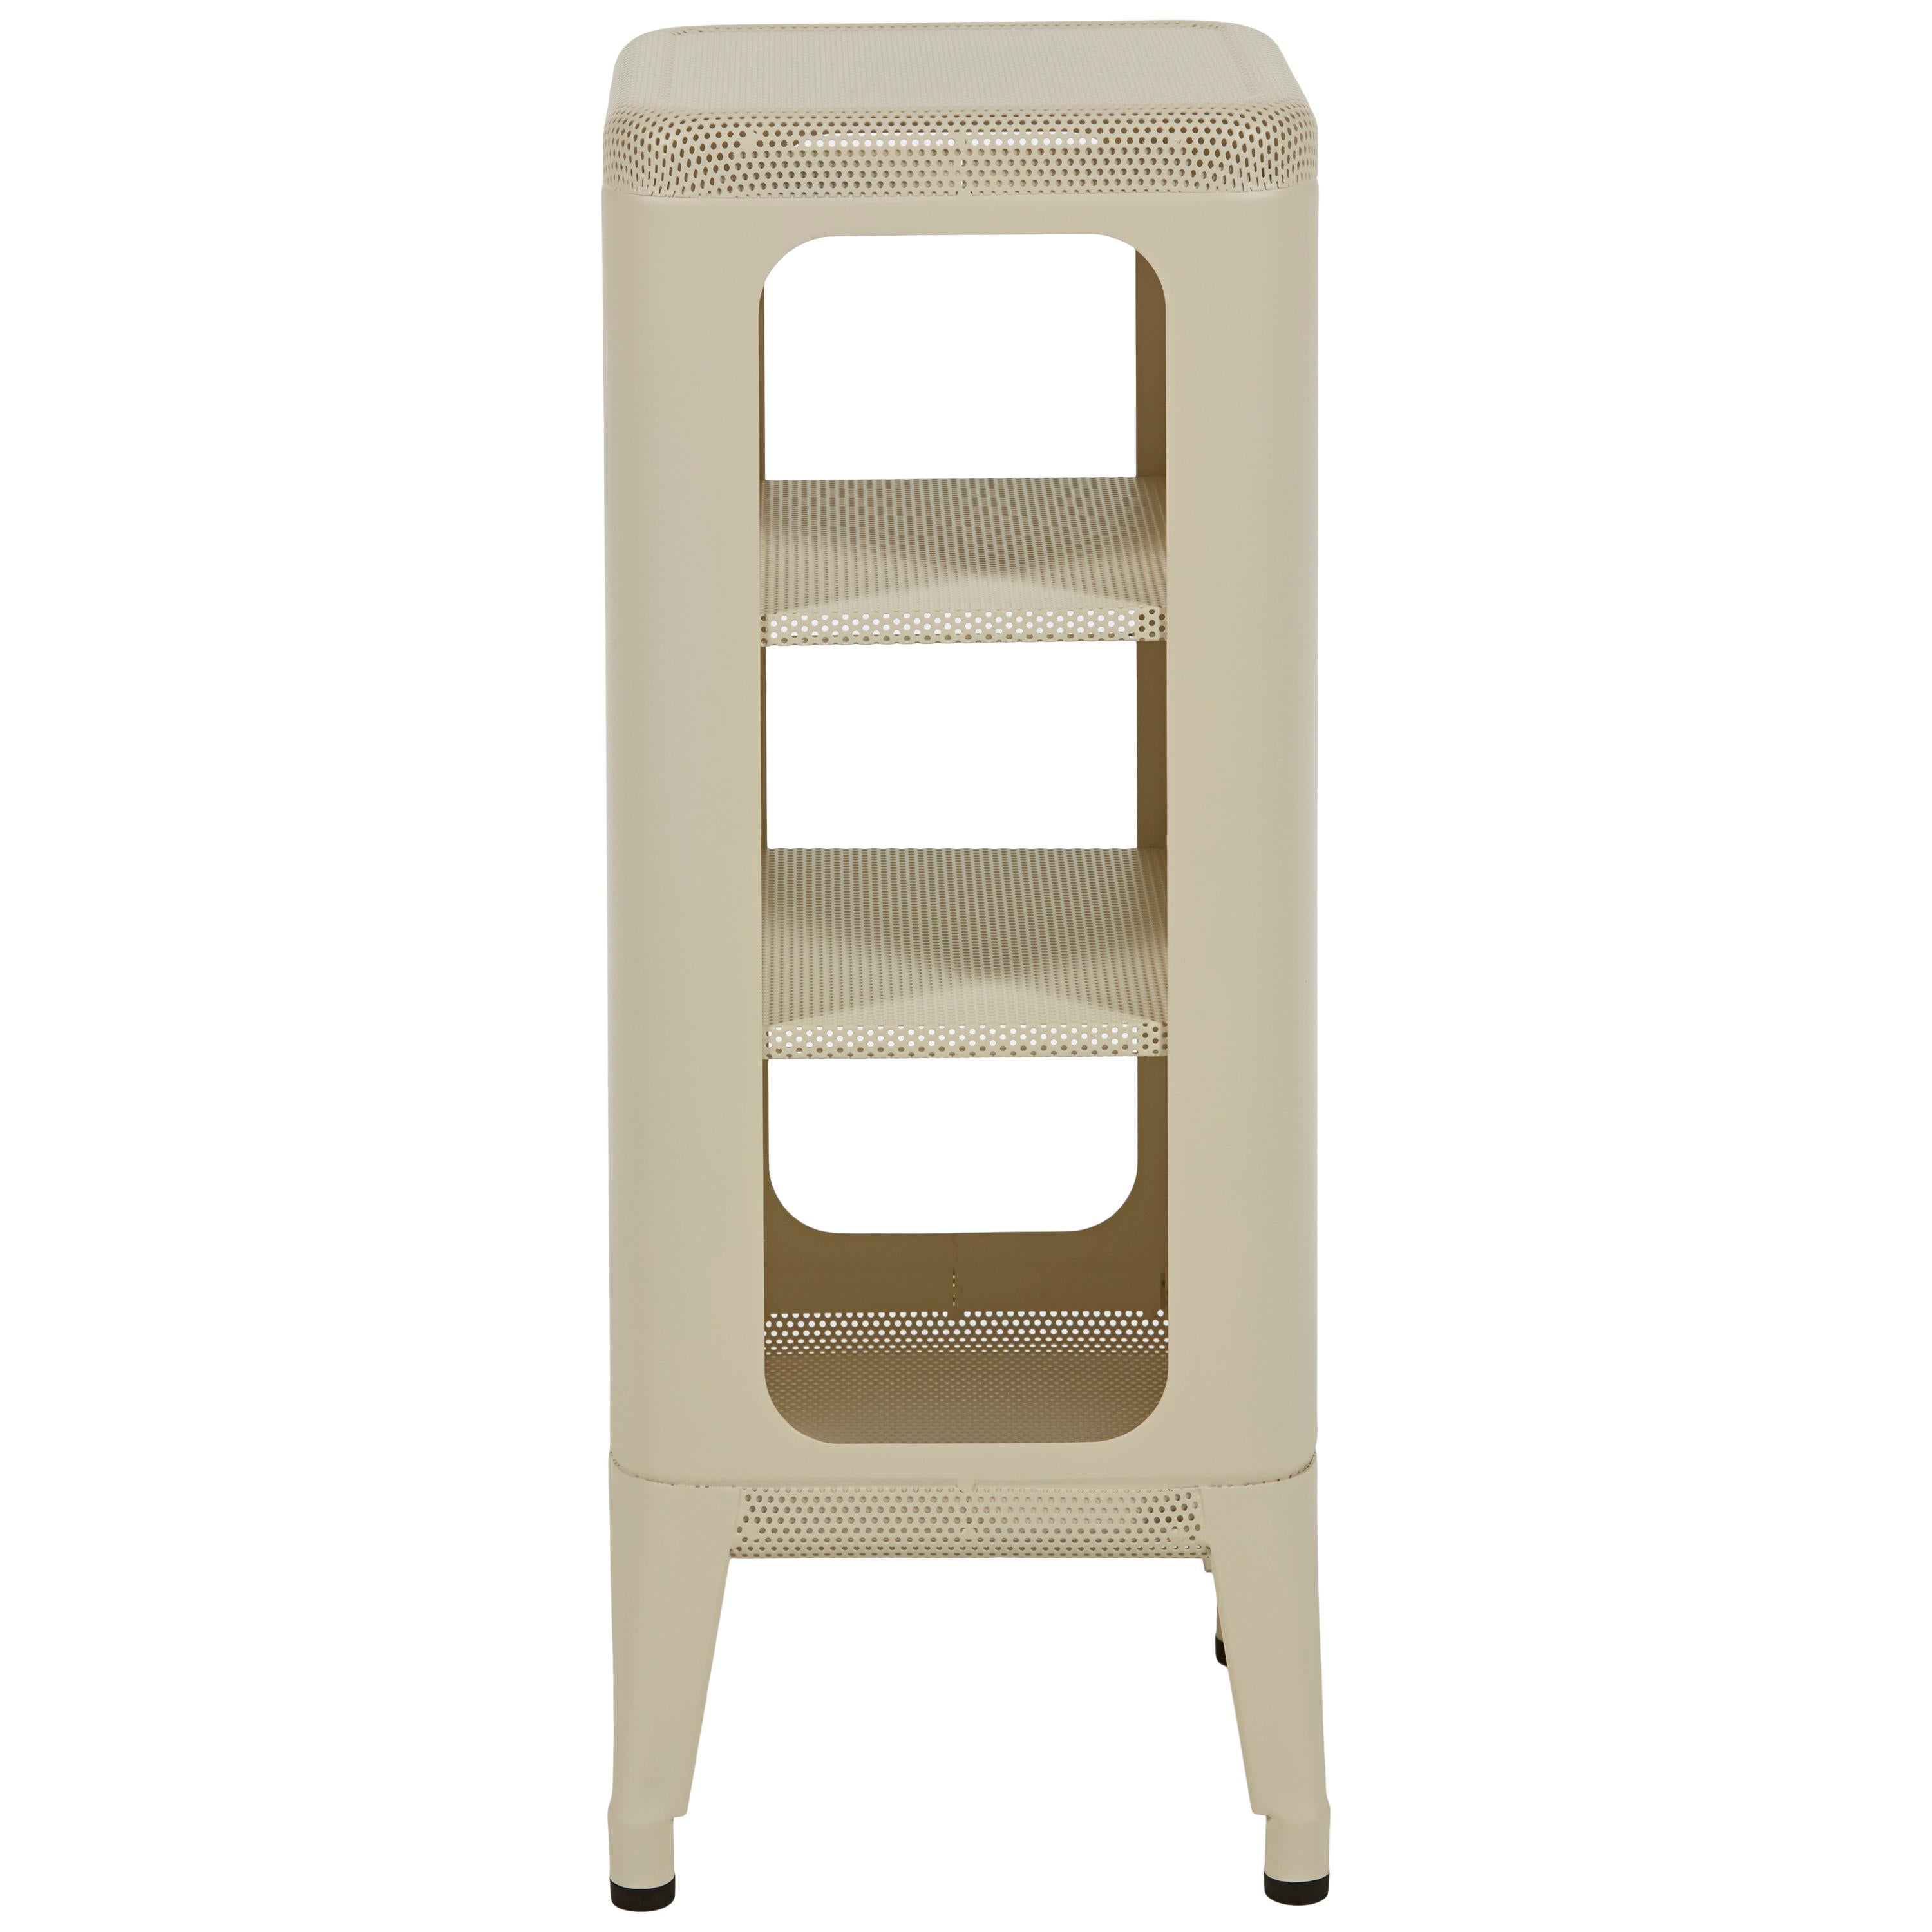 For Sale: White (Ivoire) Stool Shelf 750 Perforated in Essential Colors by Frederic Gaunet and Tolix